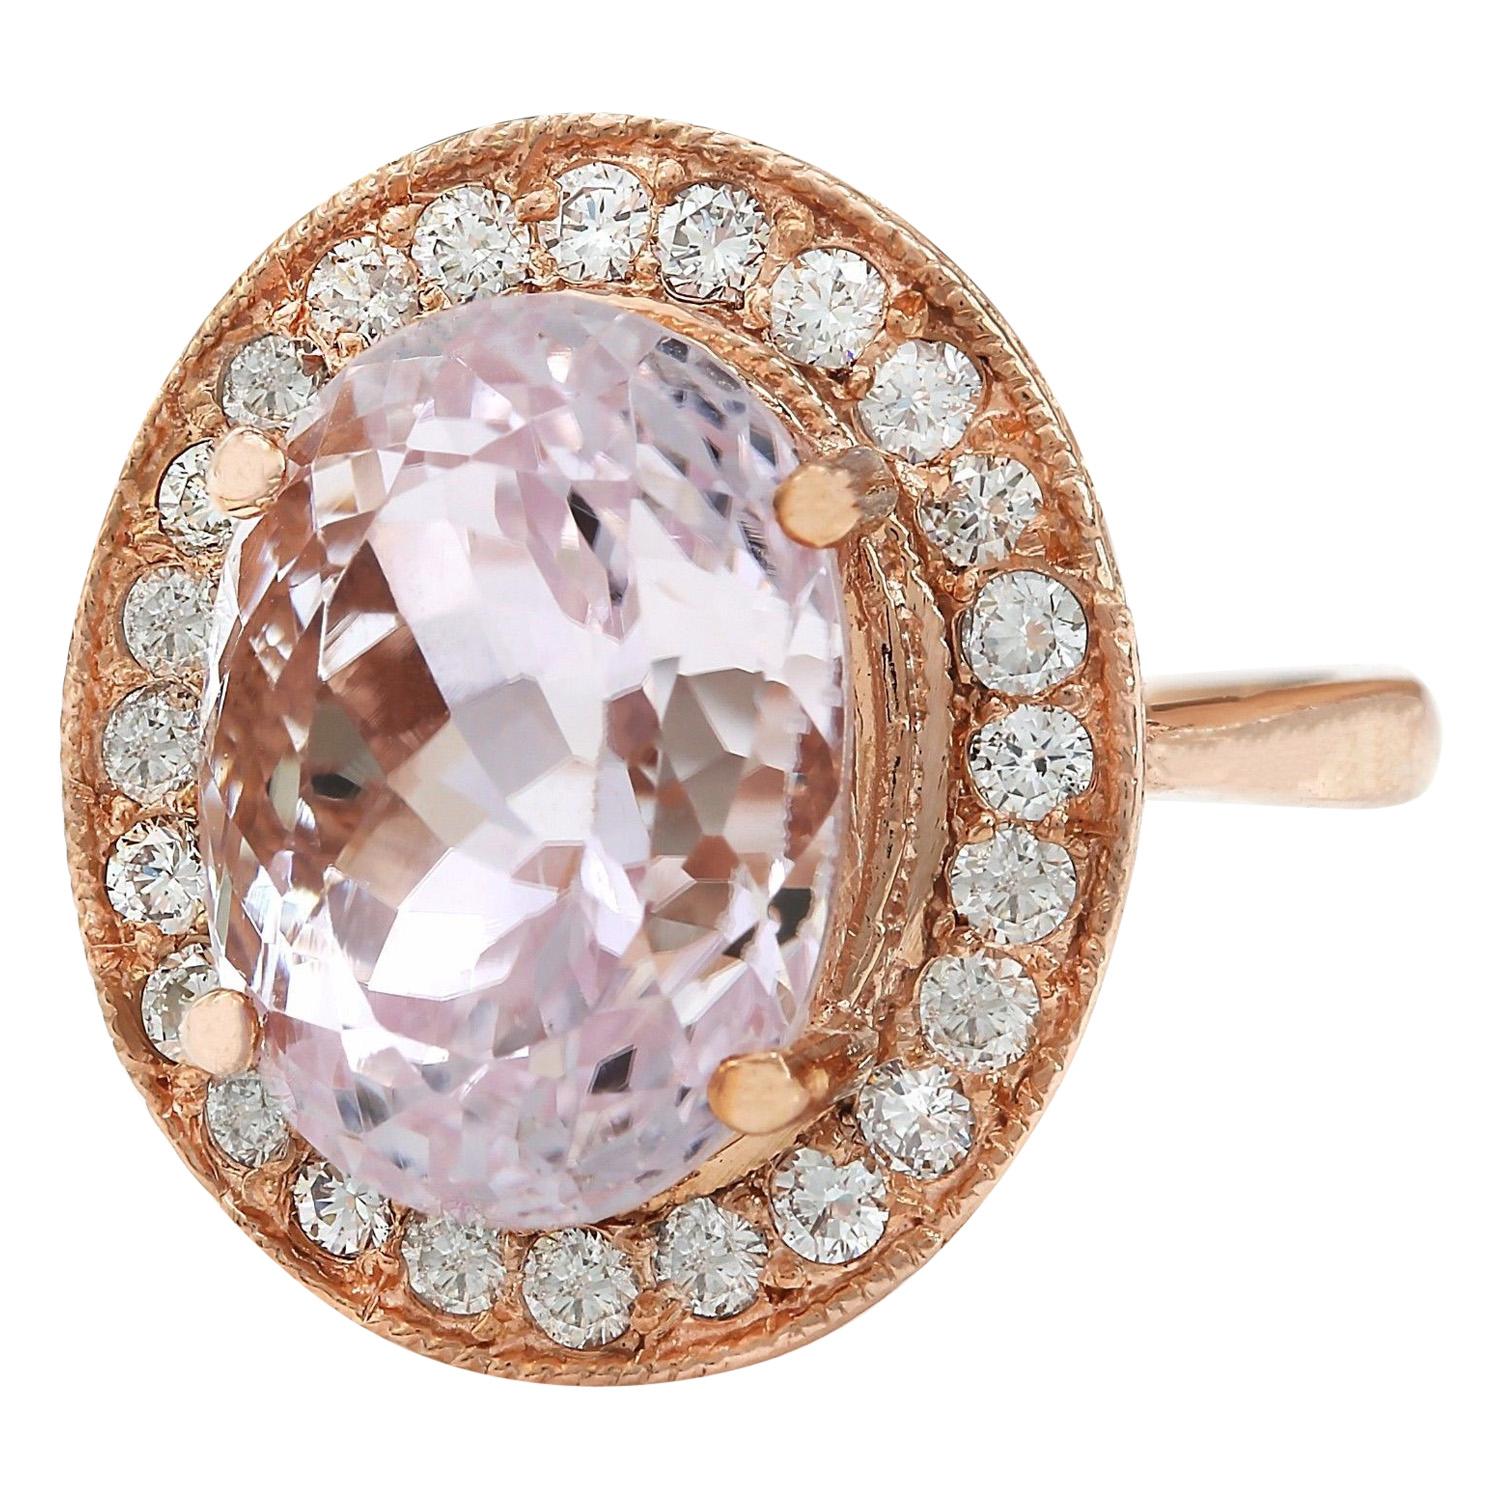 10.57 Carat Natural Kunzite 14K Solid Rose Gold Diamond Ring
 Item Type: Ring
 Item Style: Cocktail
 Material: 14K Rose Gold
 Mainstone: Kunzite
 Stone Color: Pink
 Stone Weight: 9.67 Carat
 Stone Shape: Oval
 Stone Quantity: 1
 Stone Dimensions: